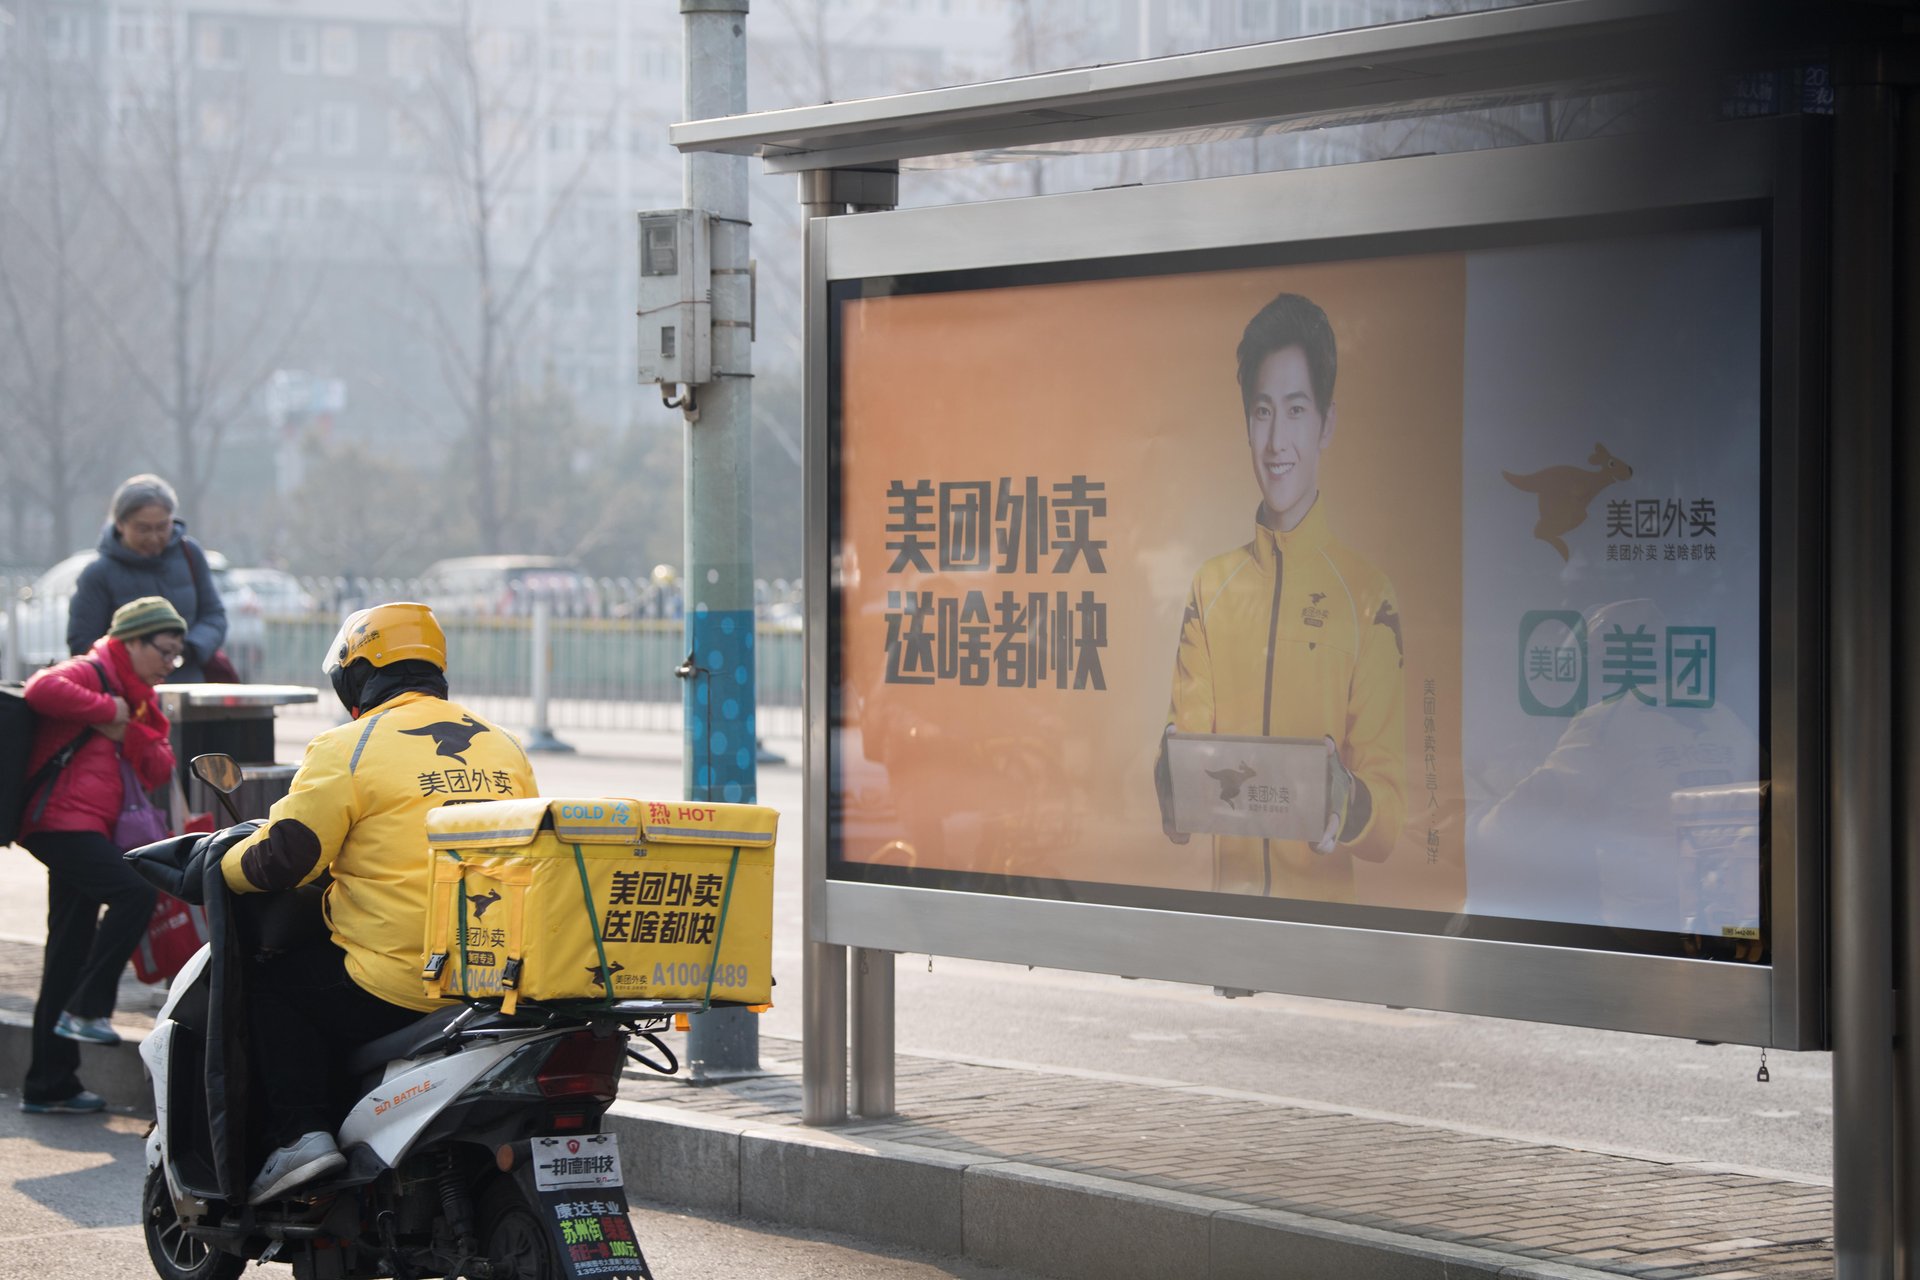 A deliveryman of Chinese online food delivery company Meituan rides past an advertisement for Meituan in Beijing, China.